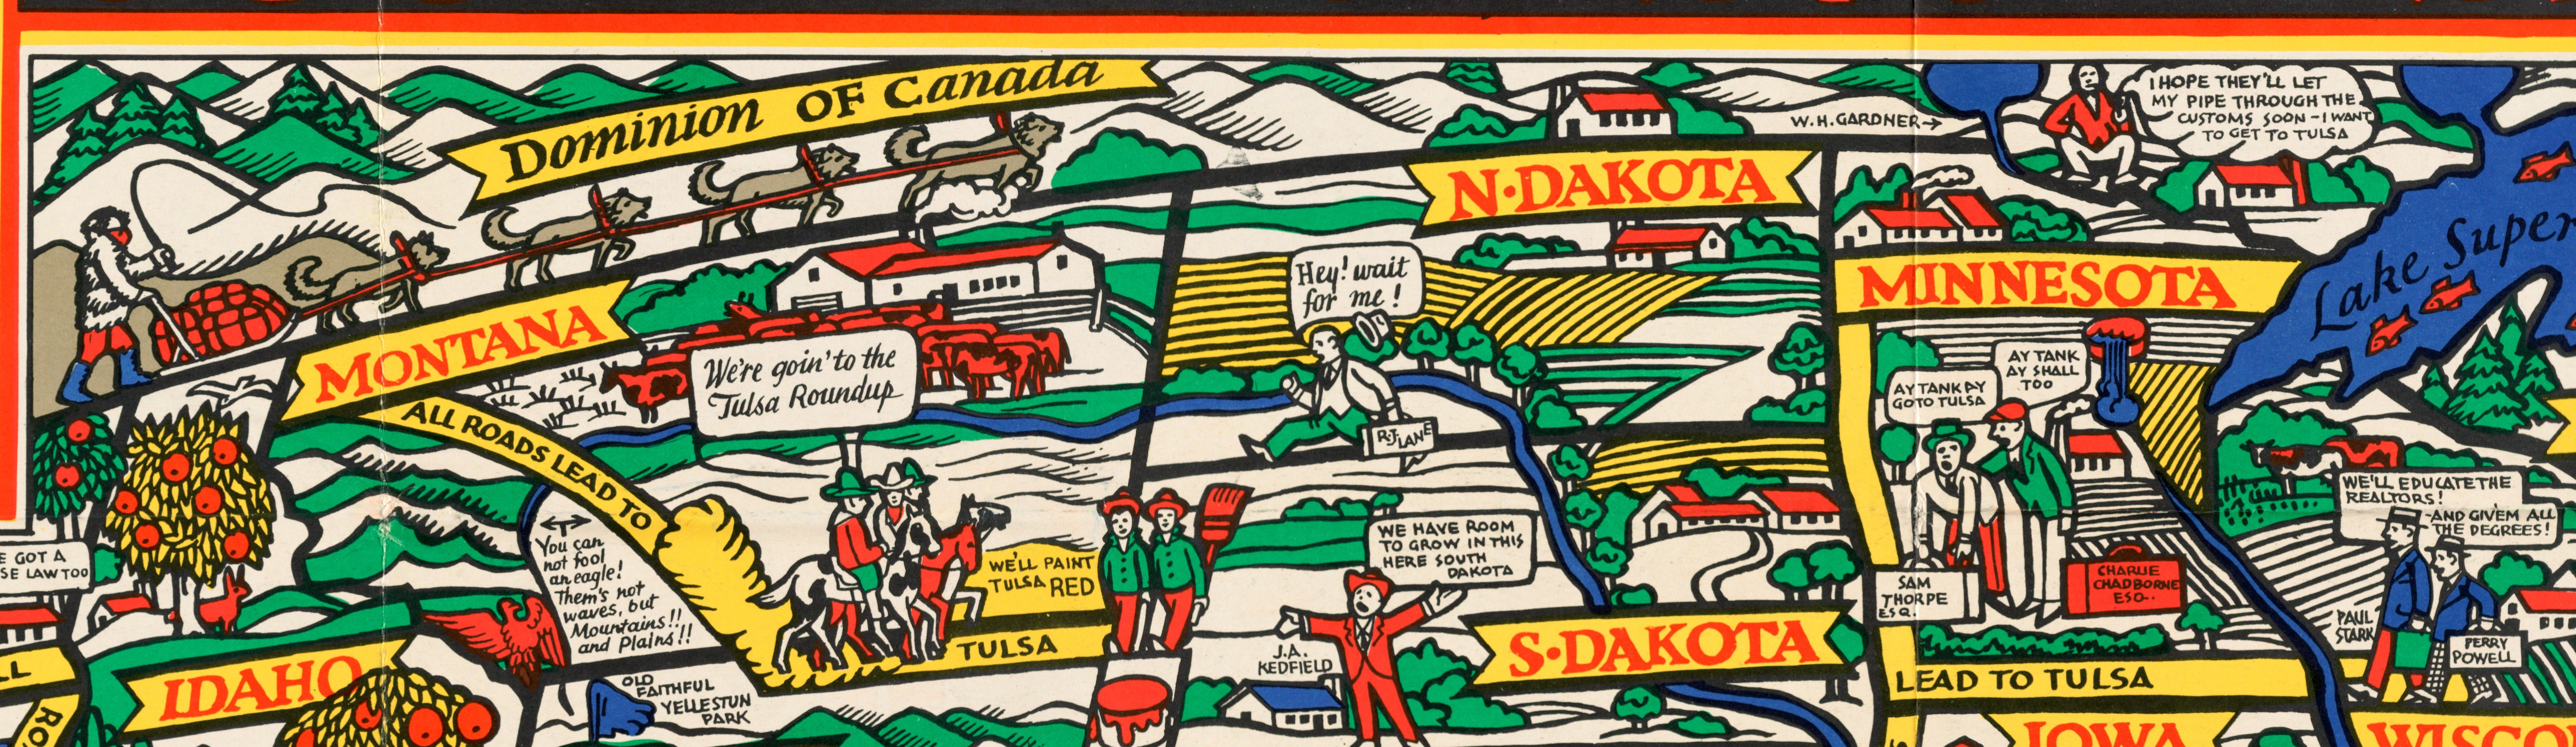 The US-Canada border on the NAREB map, complete with bobsleds and characters.